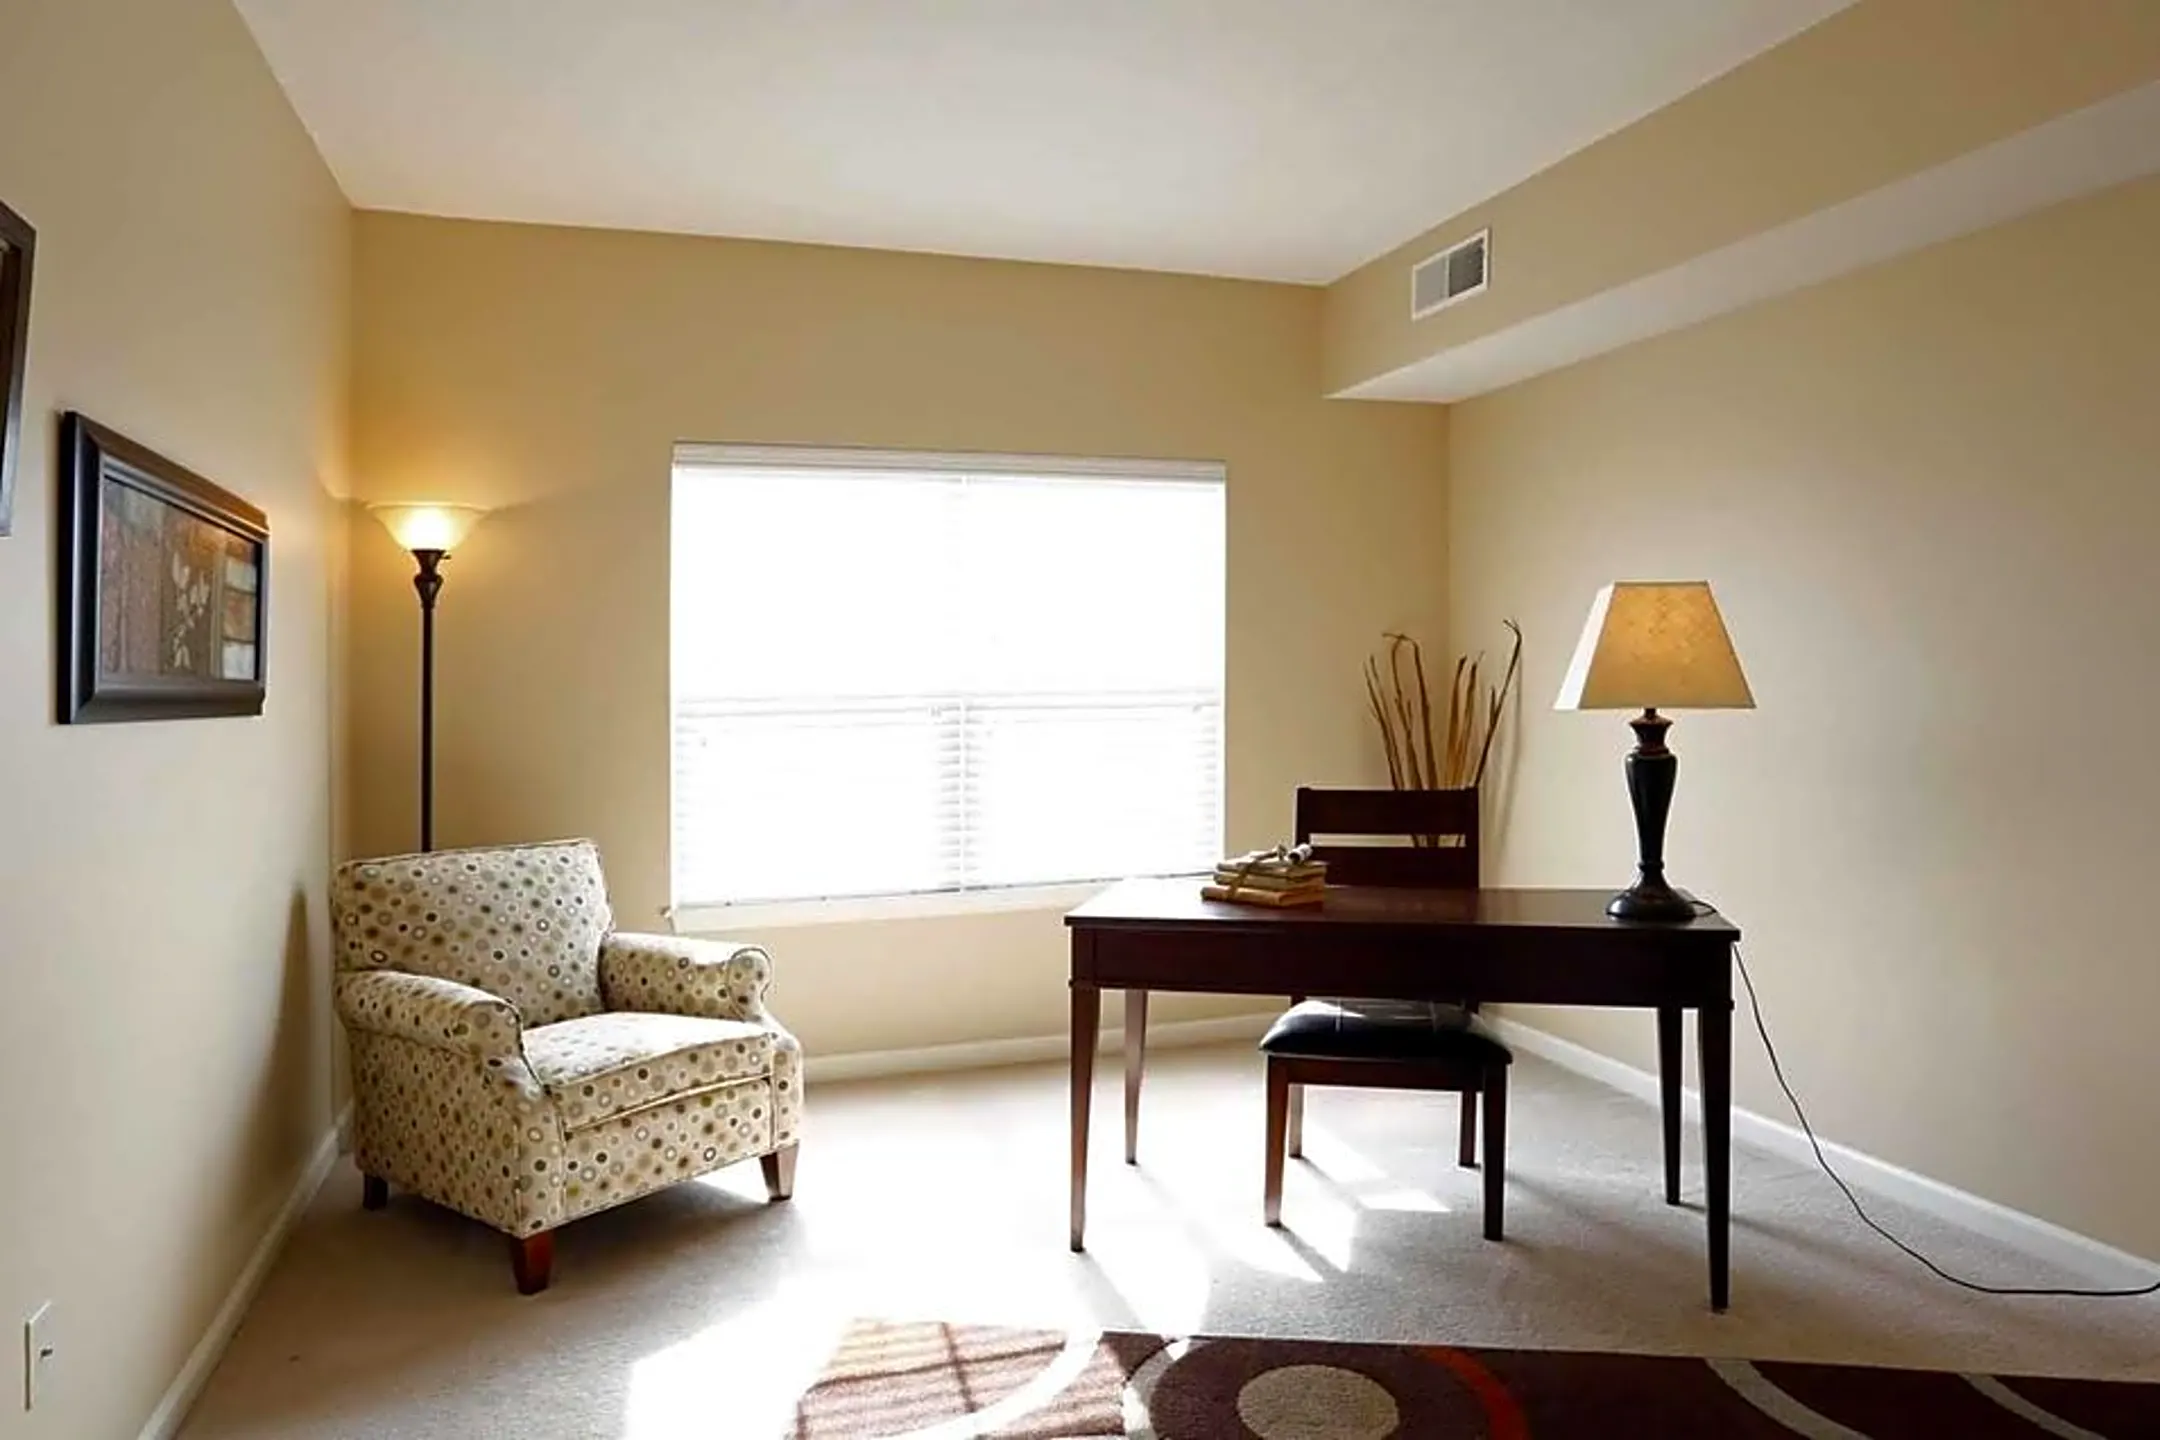 Living Room - The Residences at Carronade - Perrysburg, OH